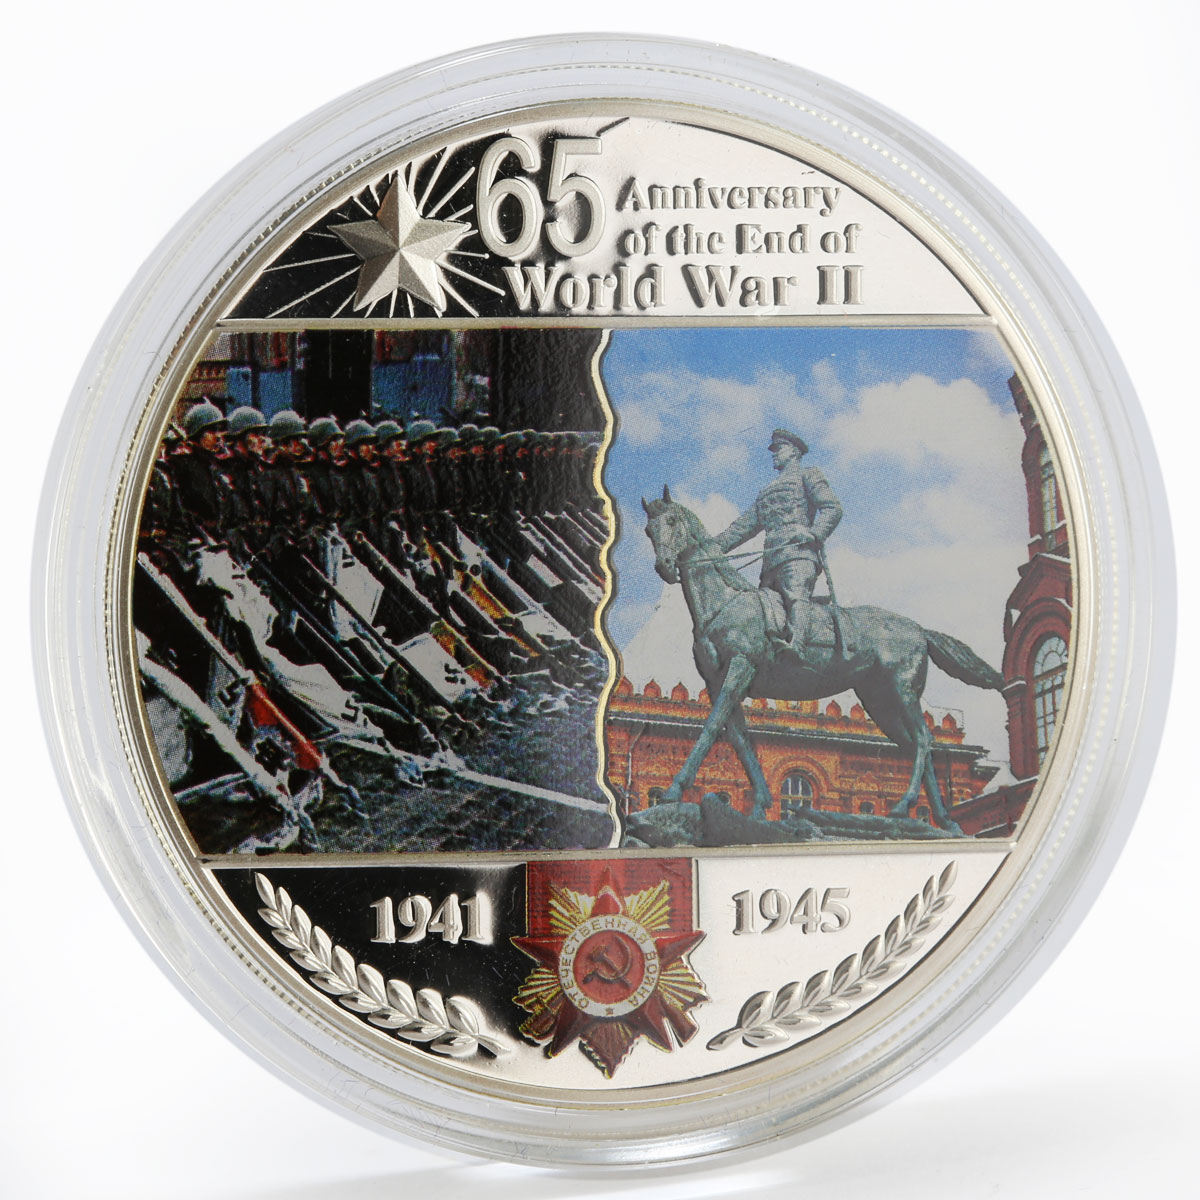 Malawi 20 kwacha 65th Anniversary The End of WWII colored proof silver coin 2010